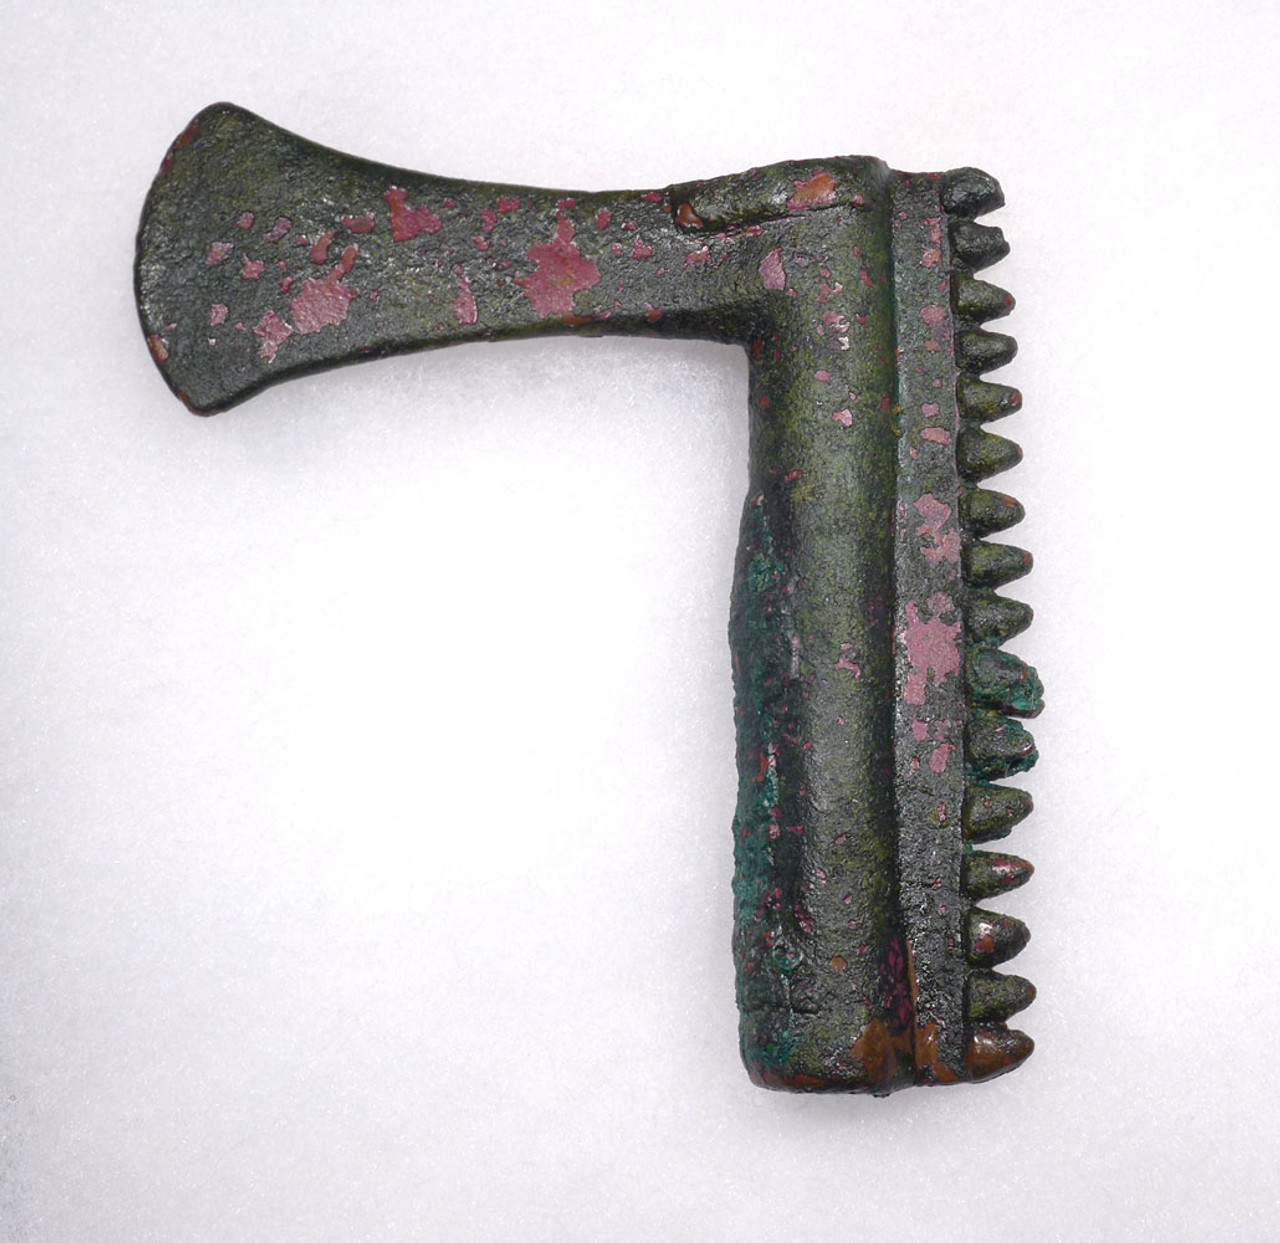 UNUSUAL ANCIENT LURISTAN BRONZE COMBAT AXE WITH LONG SERRATED SHAFT  *LUR171